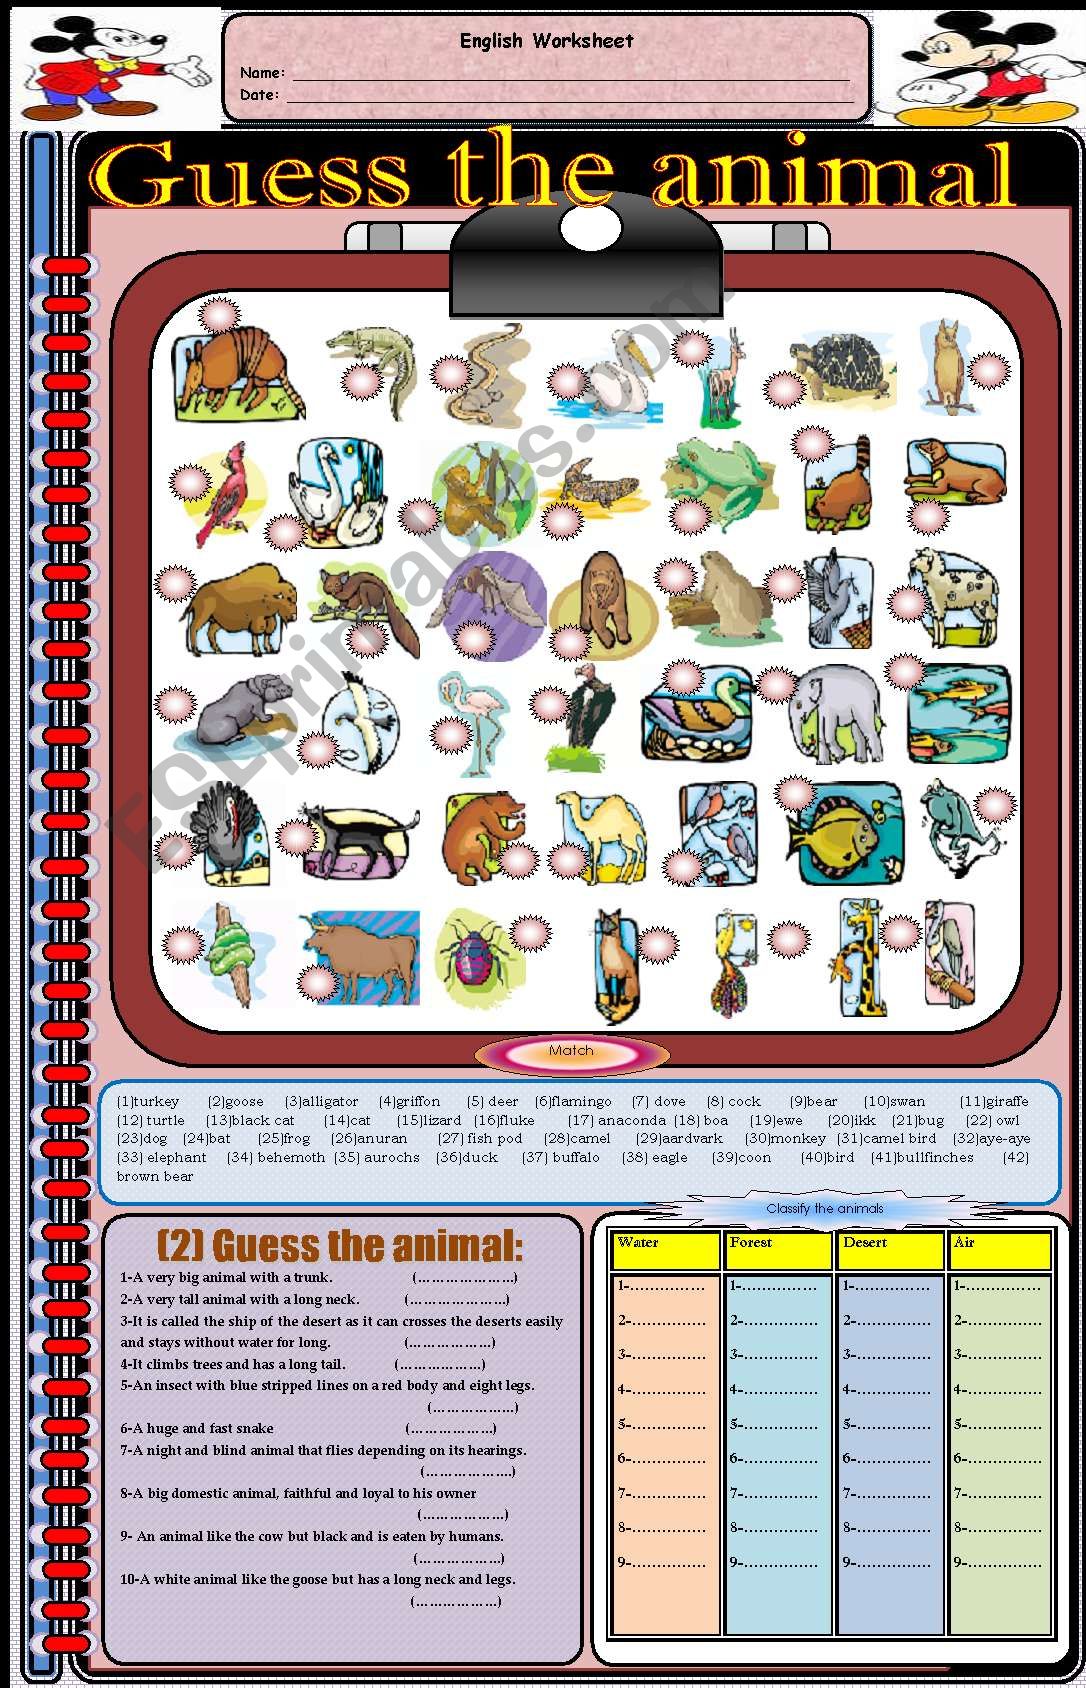 Guess the animal (part 1) worksheet